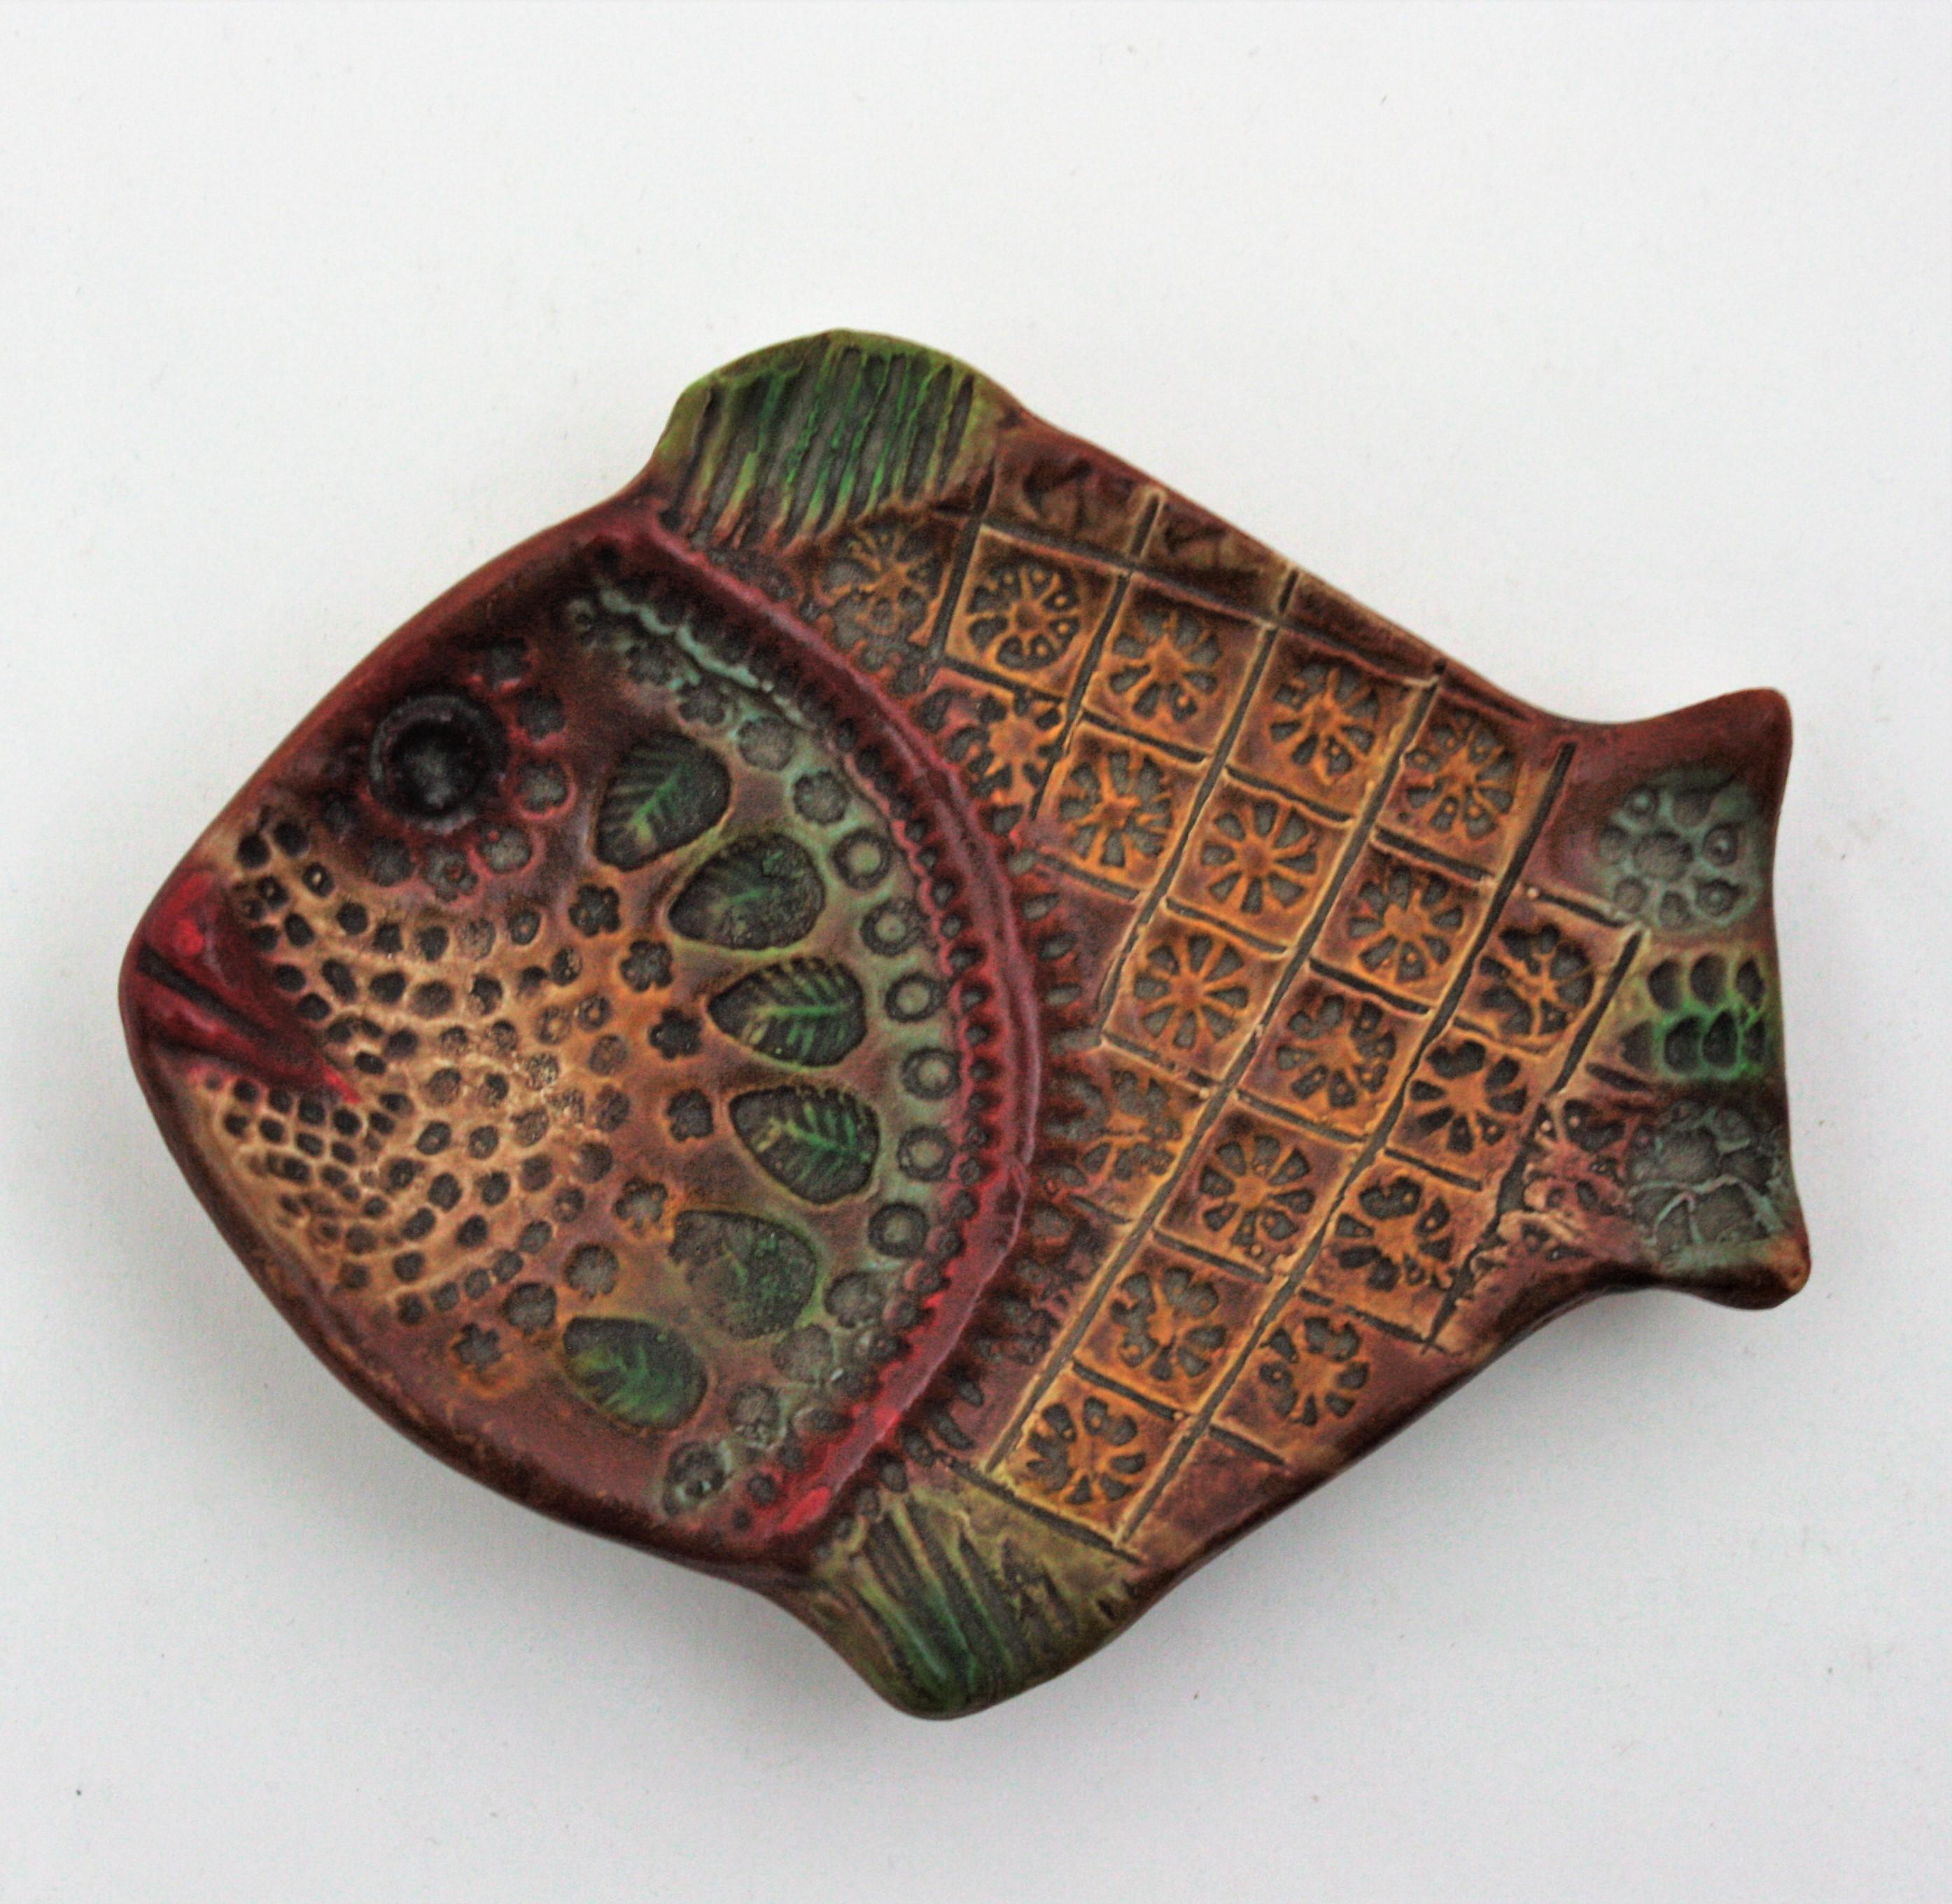 Glazed Midcentury Ceramic Fish Plates Wall Composition / Wall Decoration For Sale